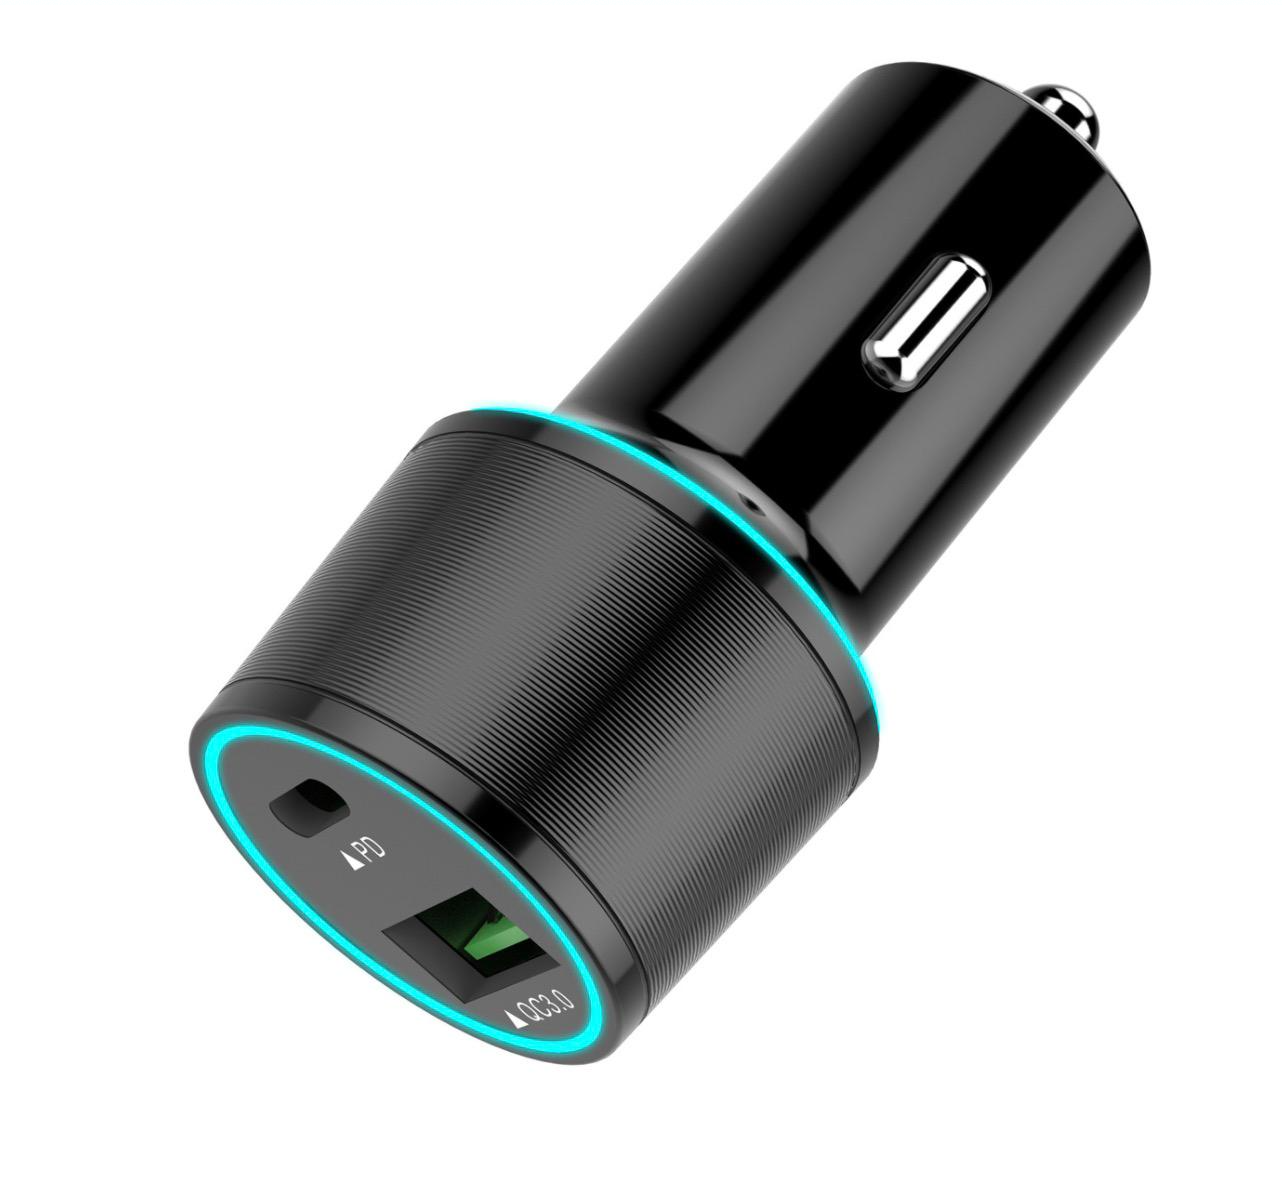 USB C Car Charger UrbanX 20W Car and Truck Charger For Realme X50 5G with Power Delivery 3.0 Cigarette Lighter USB Charger - Black, Comes with USB C to USB C PD Cable 3.3FT 1M - image 2 of 3